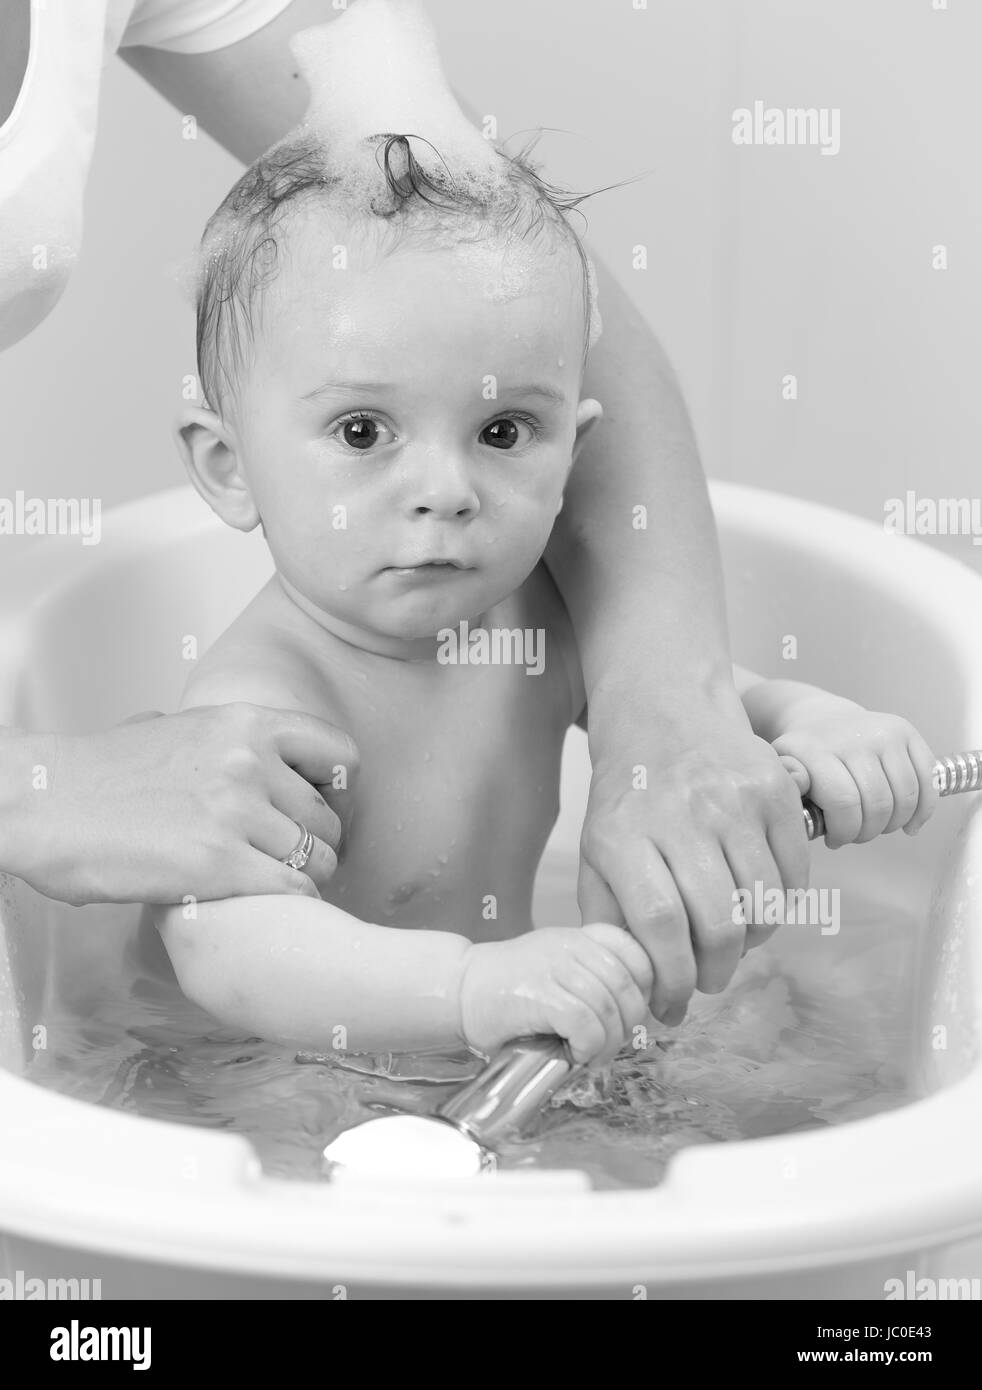 Child girl shower bathroom Black and White Stock Photos & Images - Alamy